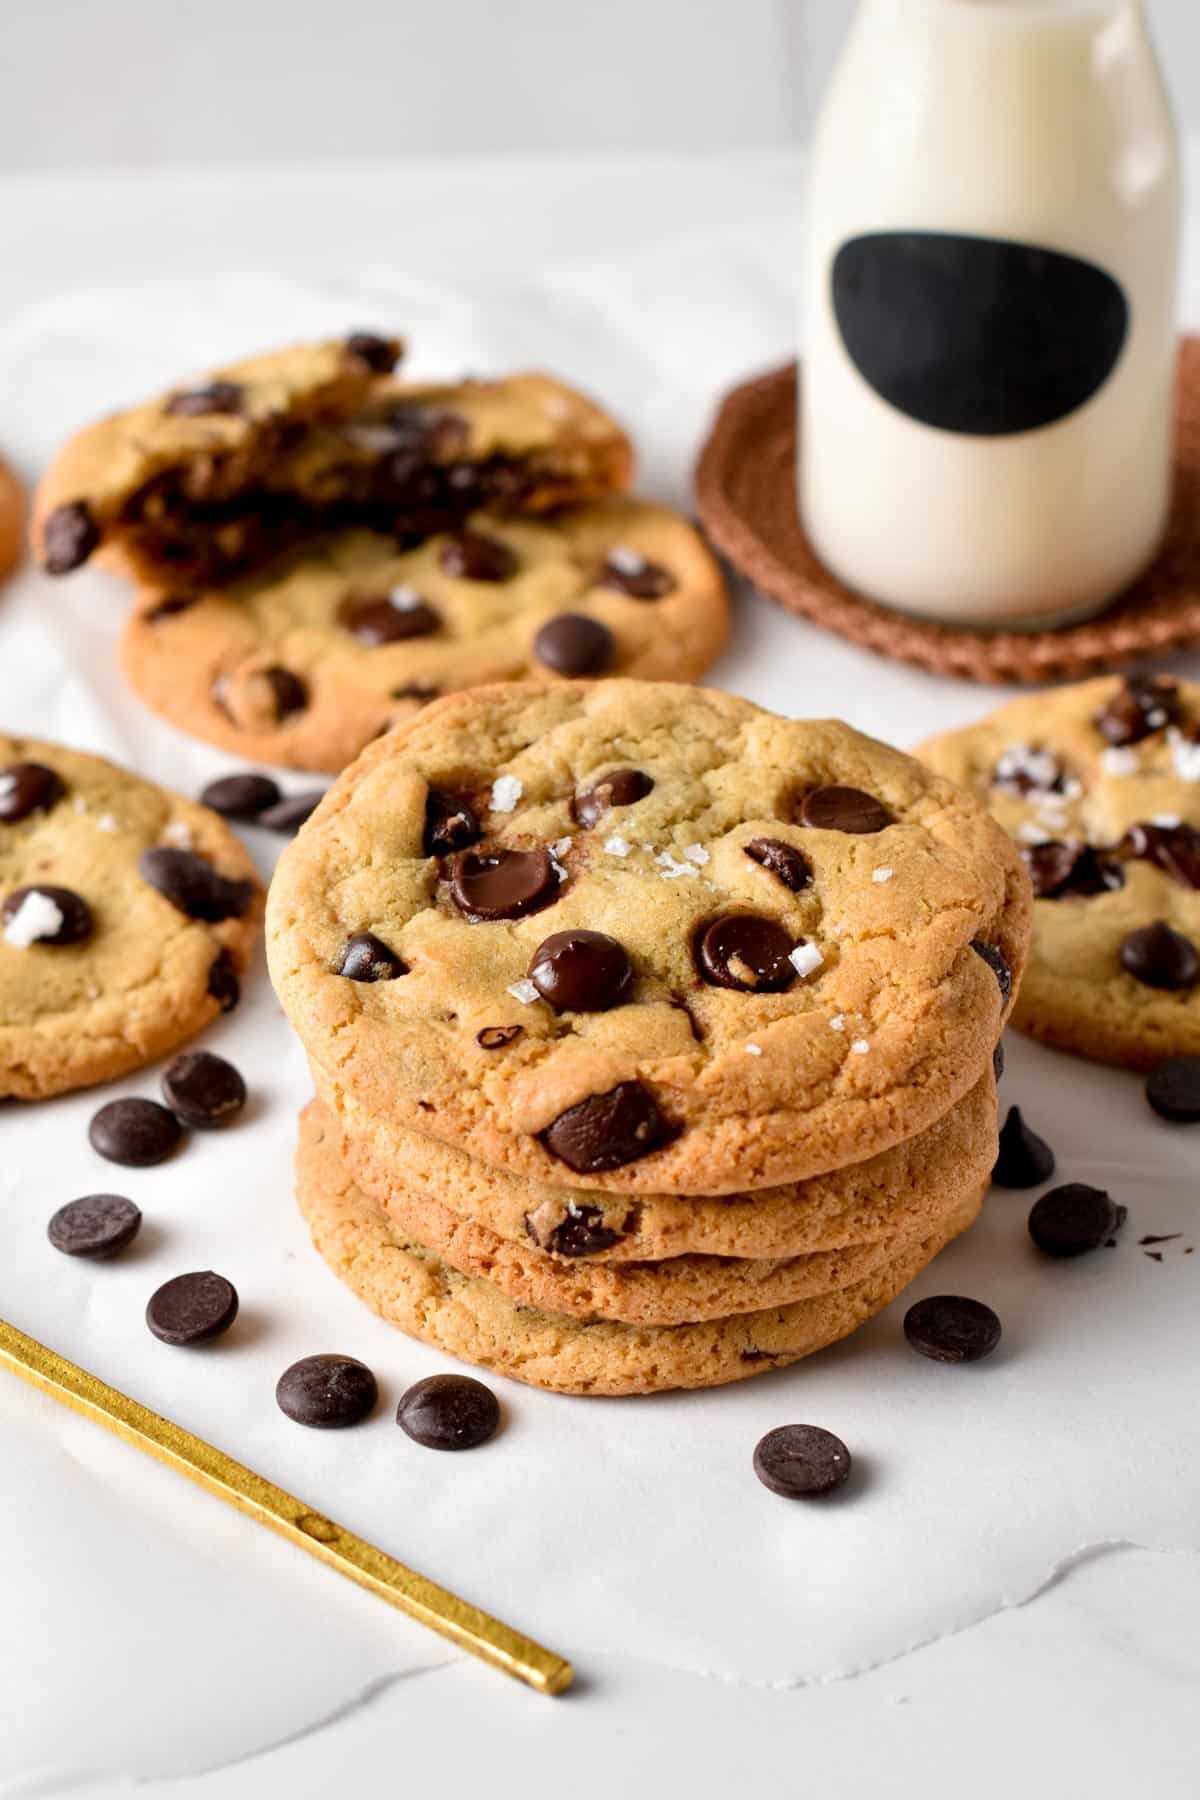 A stack of vegan chocolate chip cookies with a pinch of sea salt flakes on top, in front of a jar of plant-based milk.